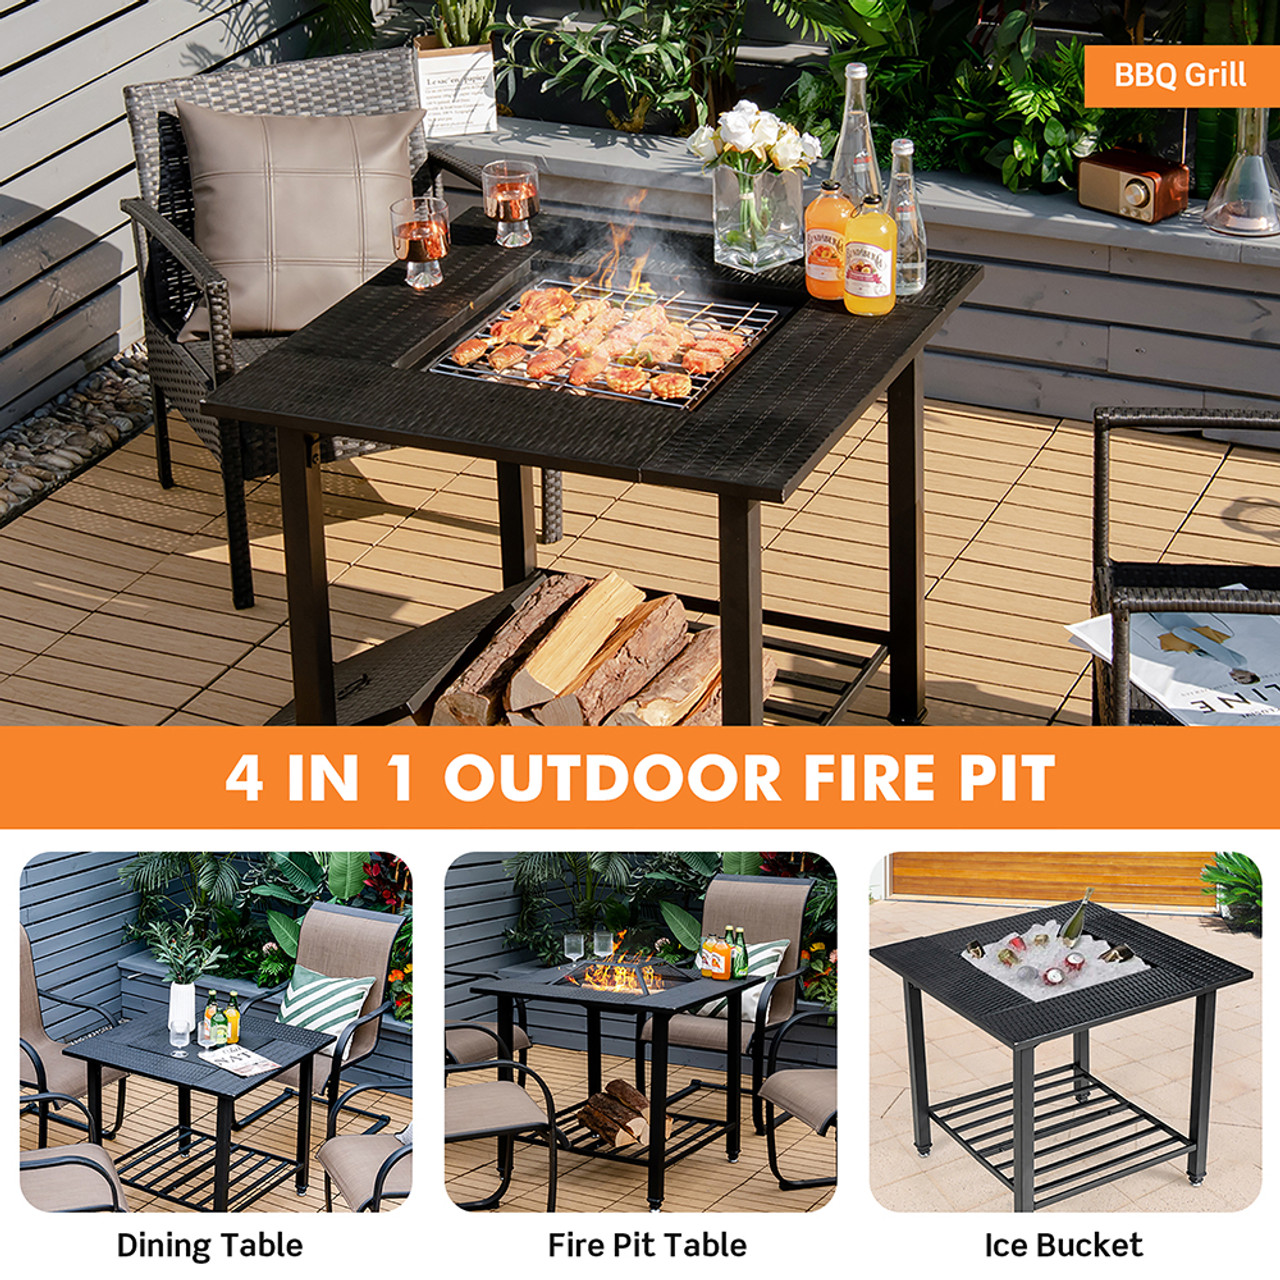 Outdoor 31-Inch Fire Pit Dining Table with Accessories product image